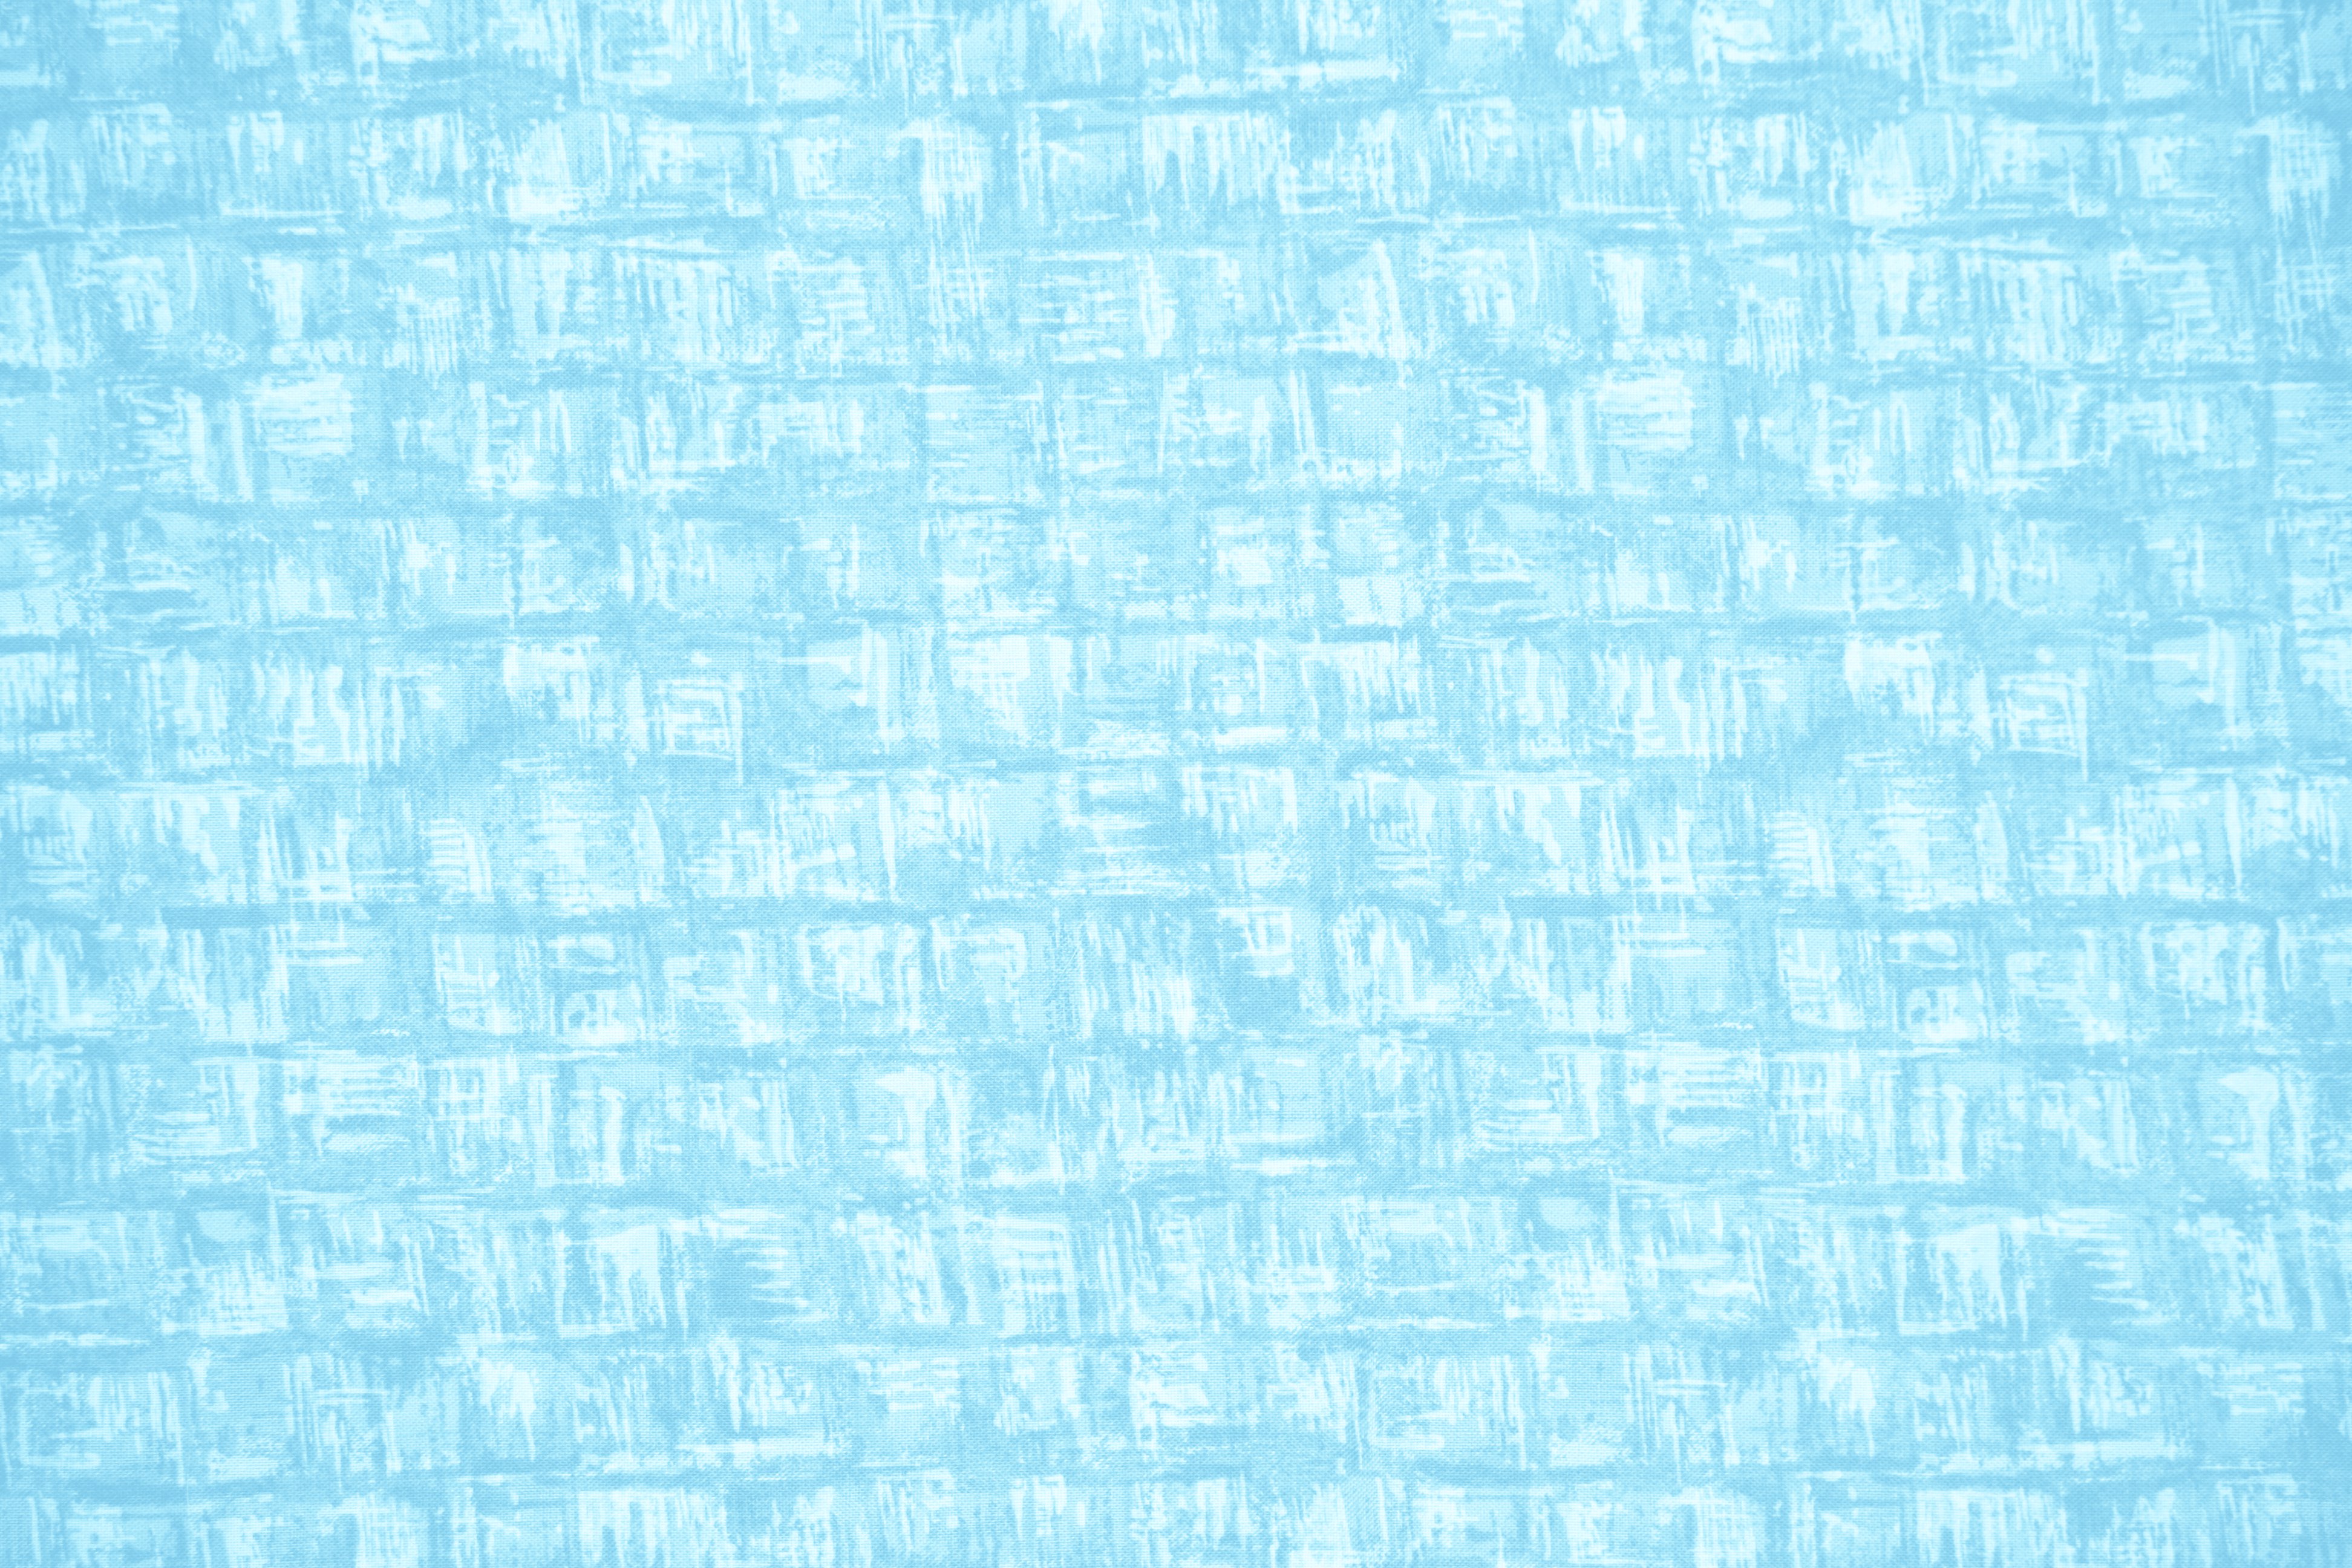 Baby Blue Abstract Squares Fabric Texture   Free High Resolution Photo